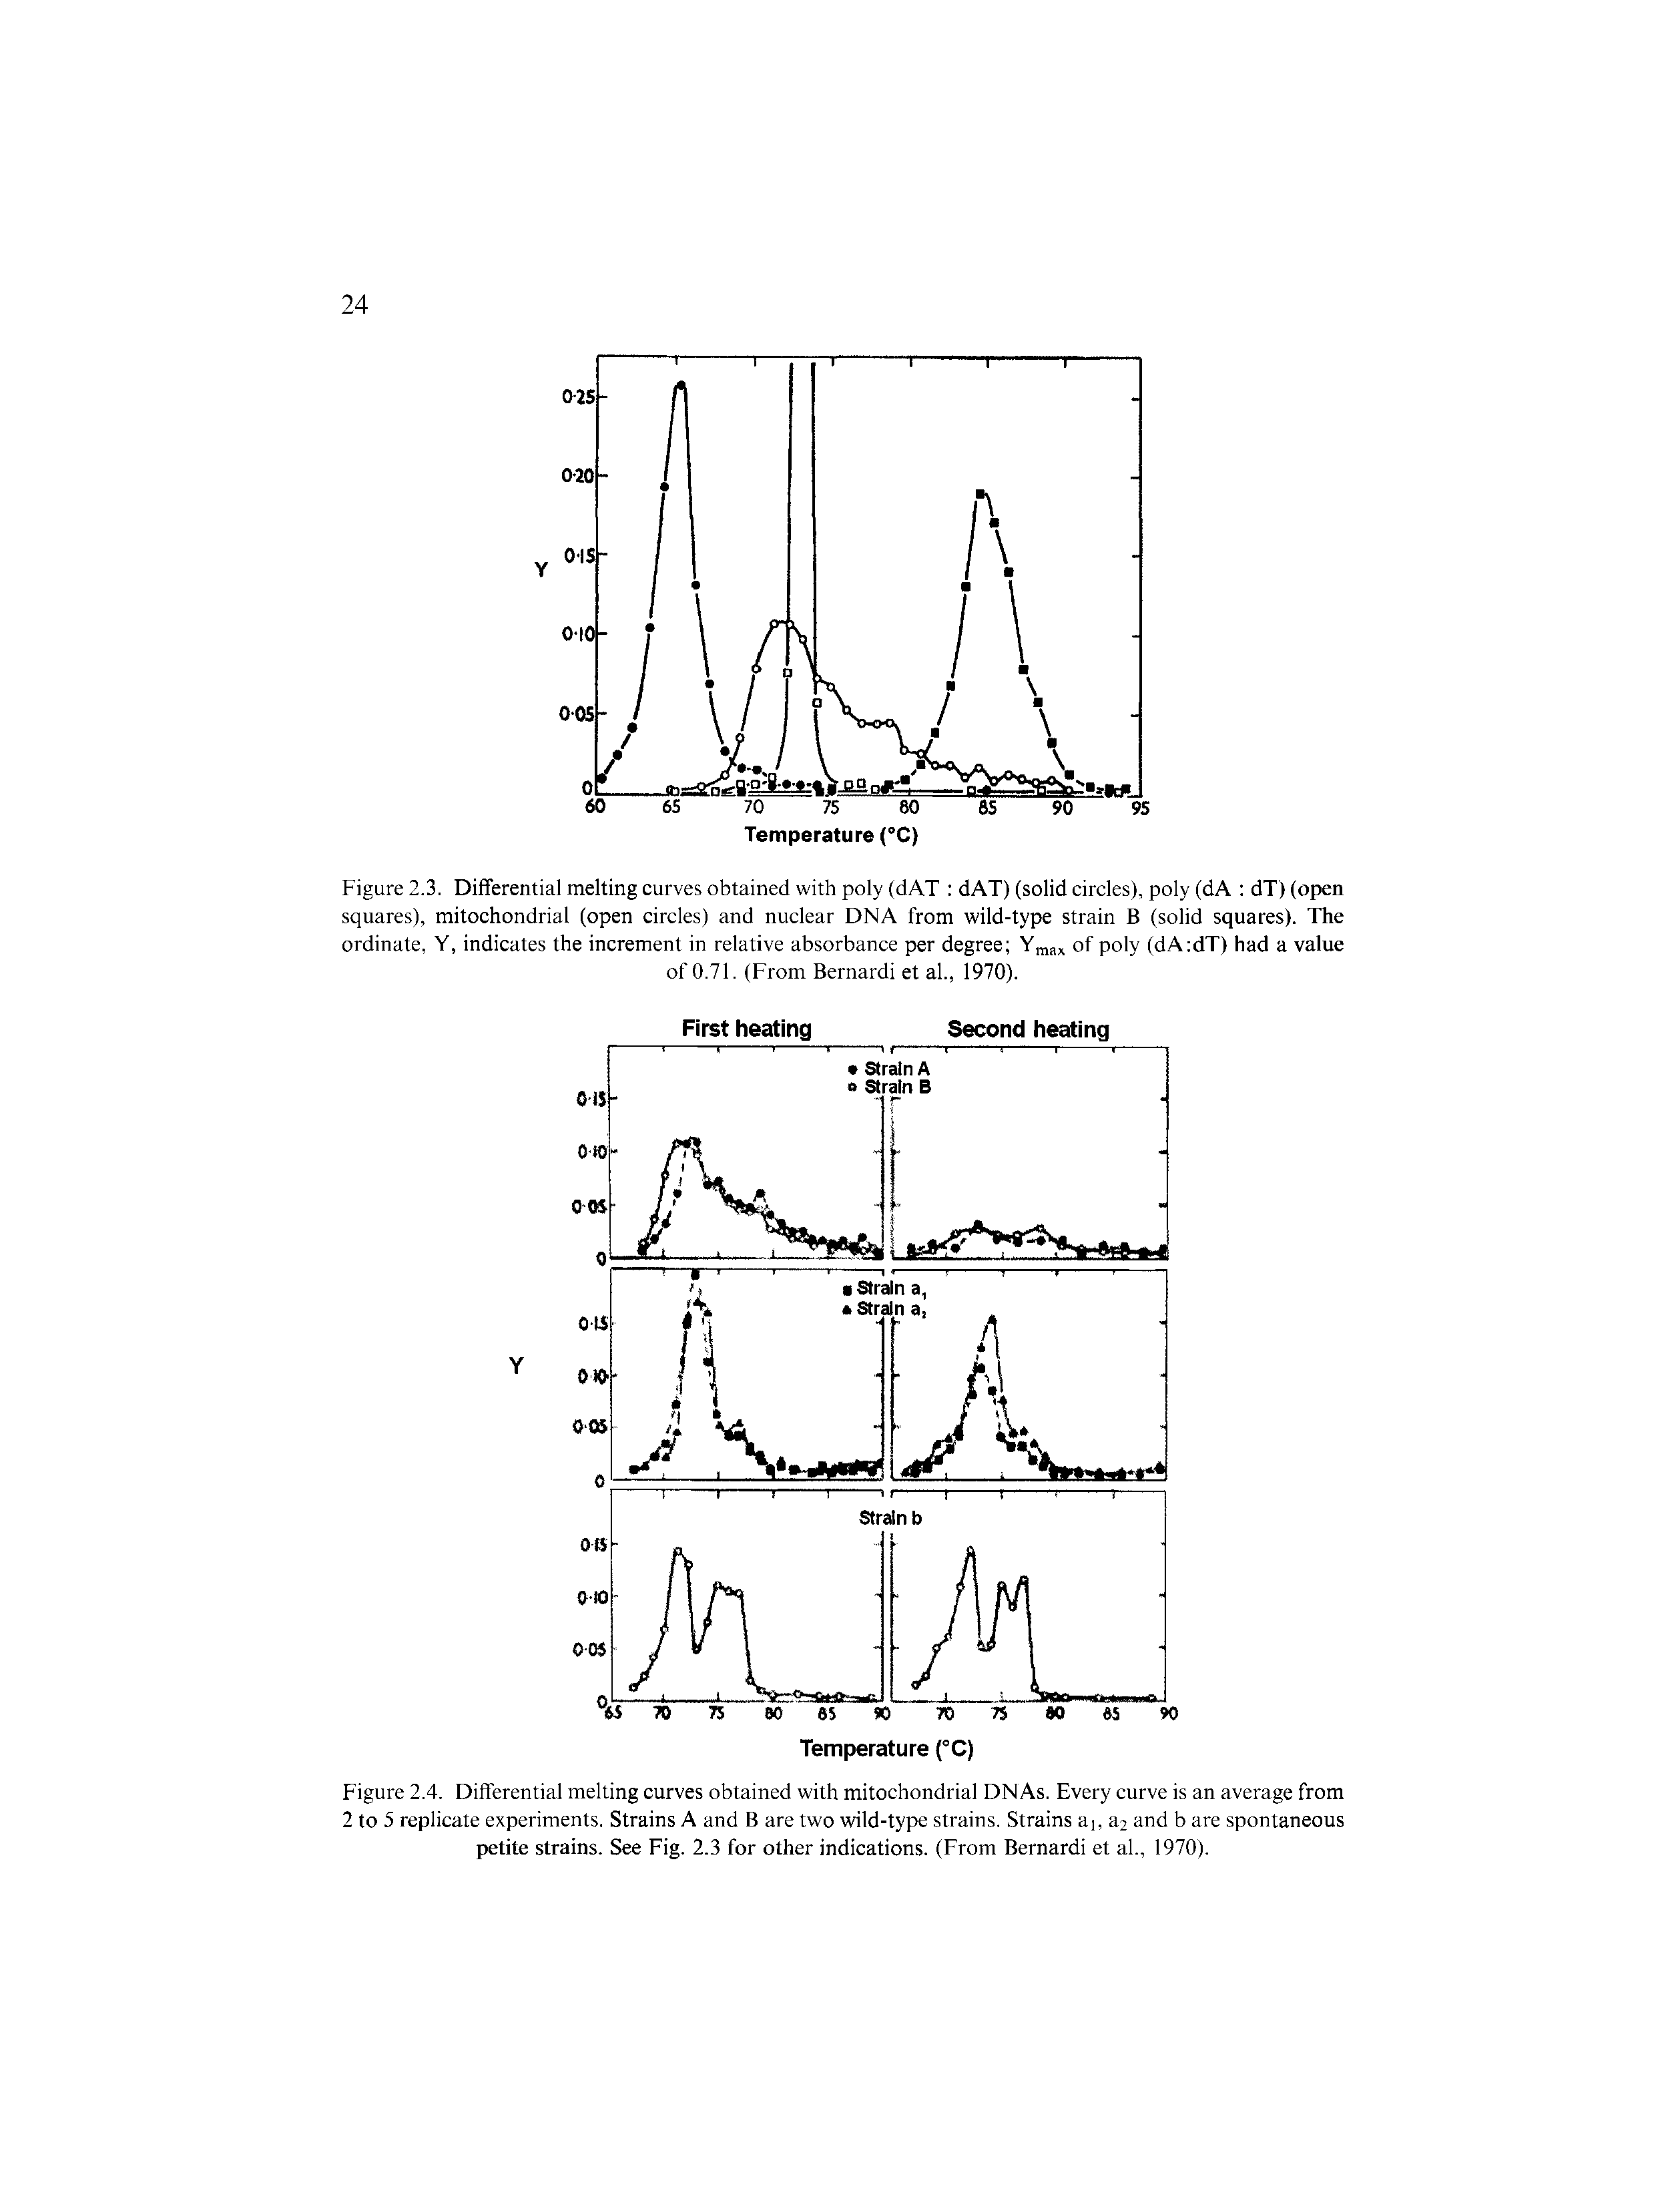 Figure 2.4. Differential melting curves obtained with mitochondrial DNAs. Every curve is an average from 2 to 5 replicate experiments. Strains A and B are two wild-type strains. Strains ai, a2 and b are spontaneous petite strains. See Fig. 2.3 for other indications. (From Bernardi et al., 1970).